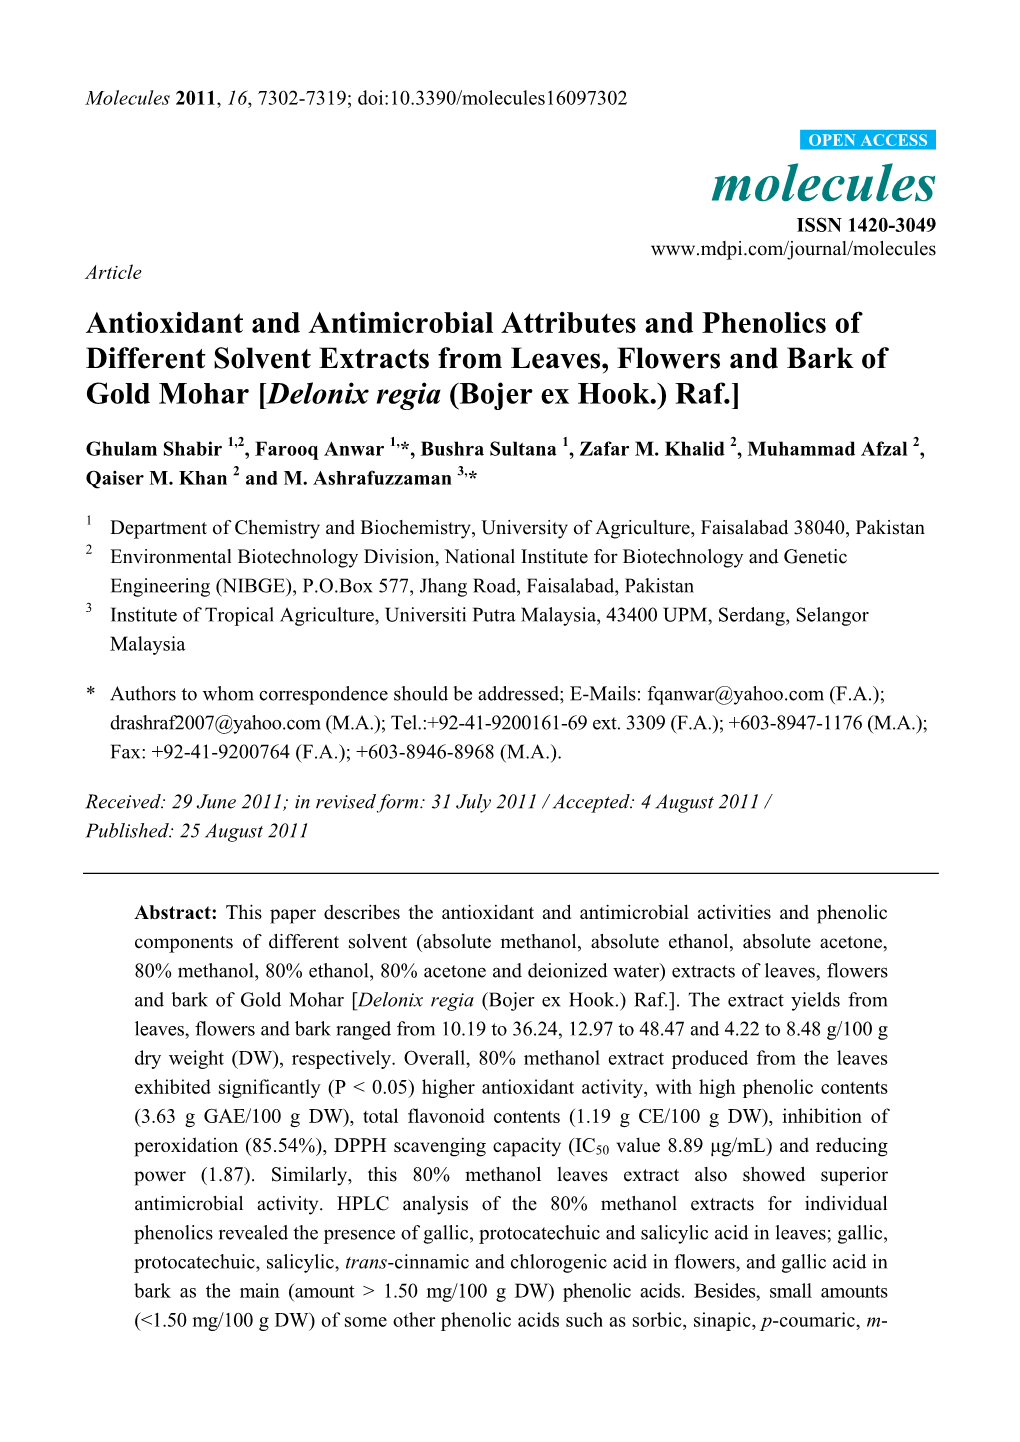 Antioxidant and Antimicrobial Attributes and Phenolics of Different Solvent Extracts from Leaves, Flowers and Bark of Gold Mohar